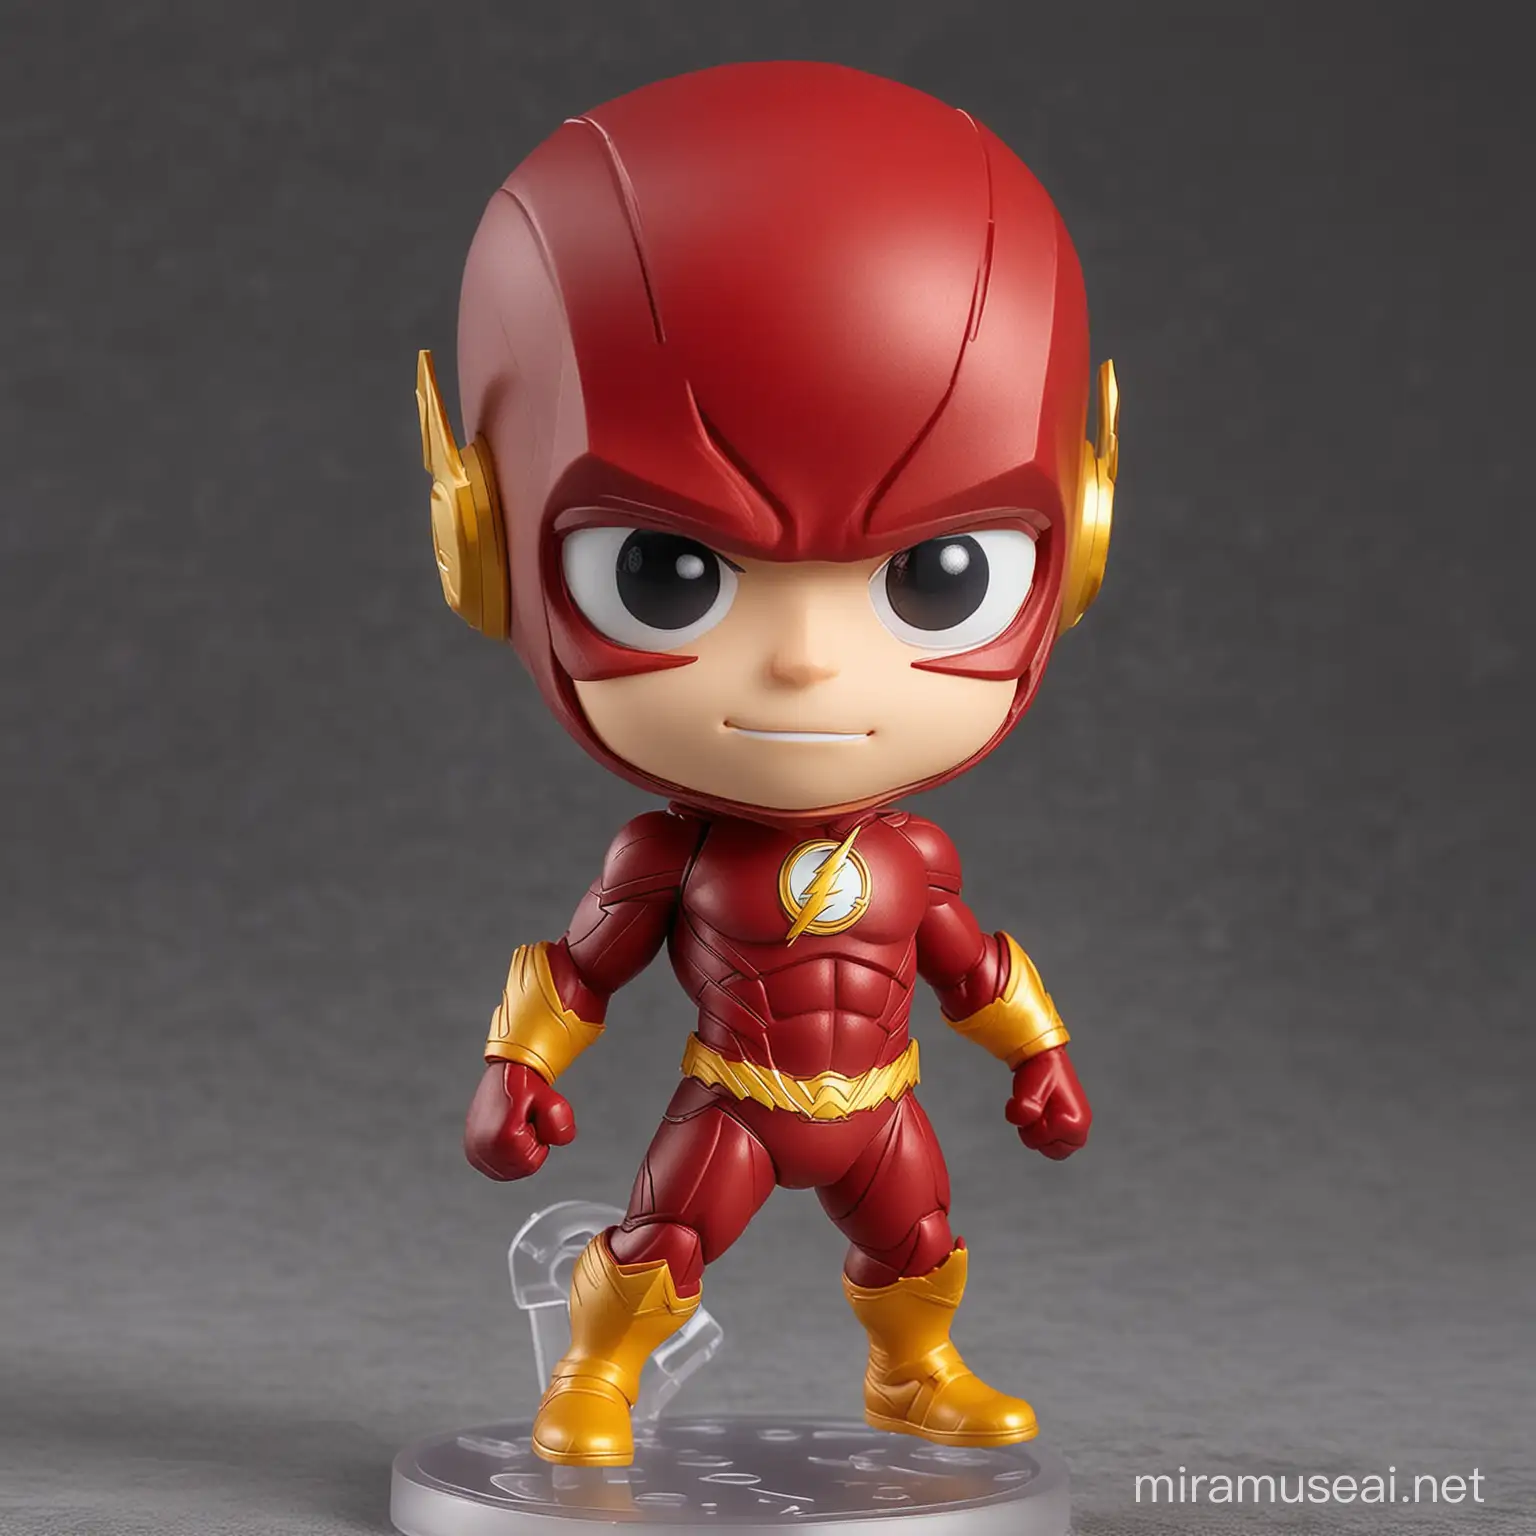 Create a Chibi (Nendoroid) version of the DC Comics character "Flash" in a running pose  without bugged or duplicated defective body parts